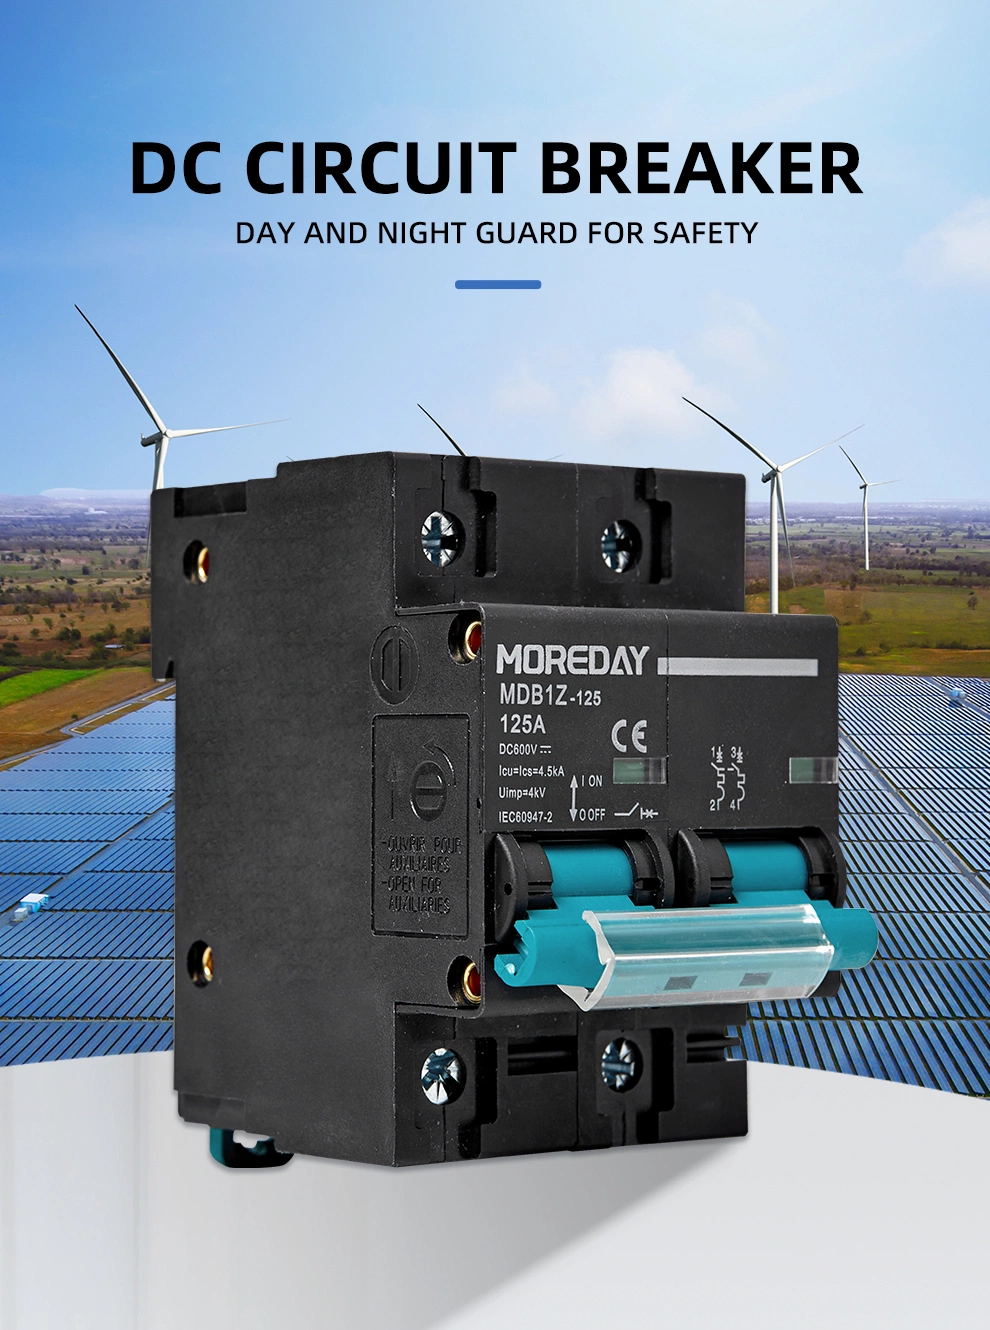 Circuit Breakers at Solar Energy PV MCB DC 1000V Mini Circuit Breaker 2p 100A 400V Photovoltaic Power Generation Switch 50A 63A 125A